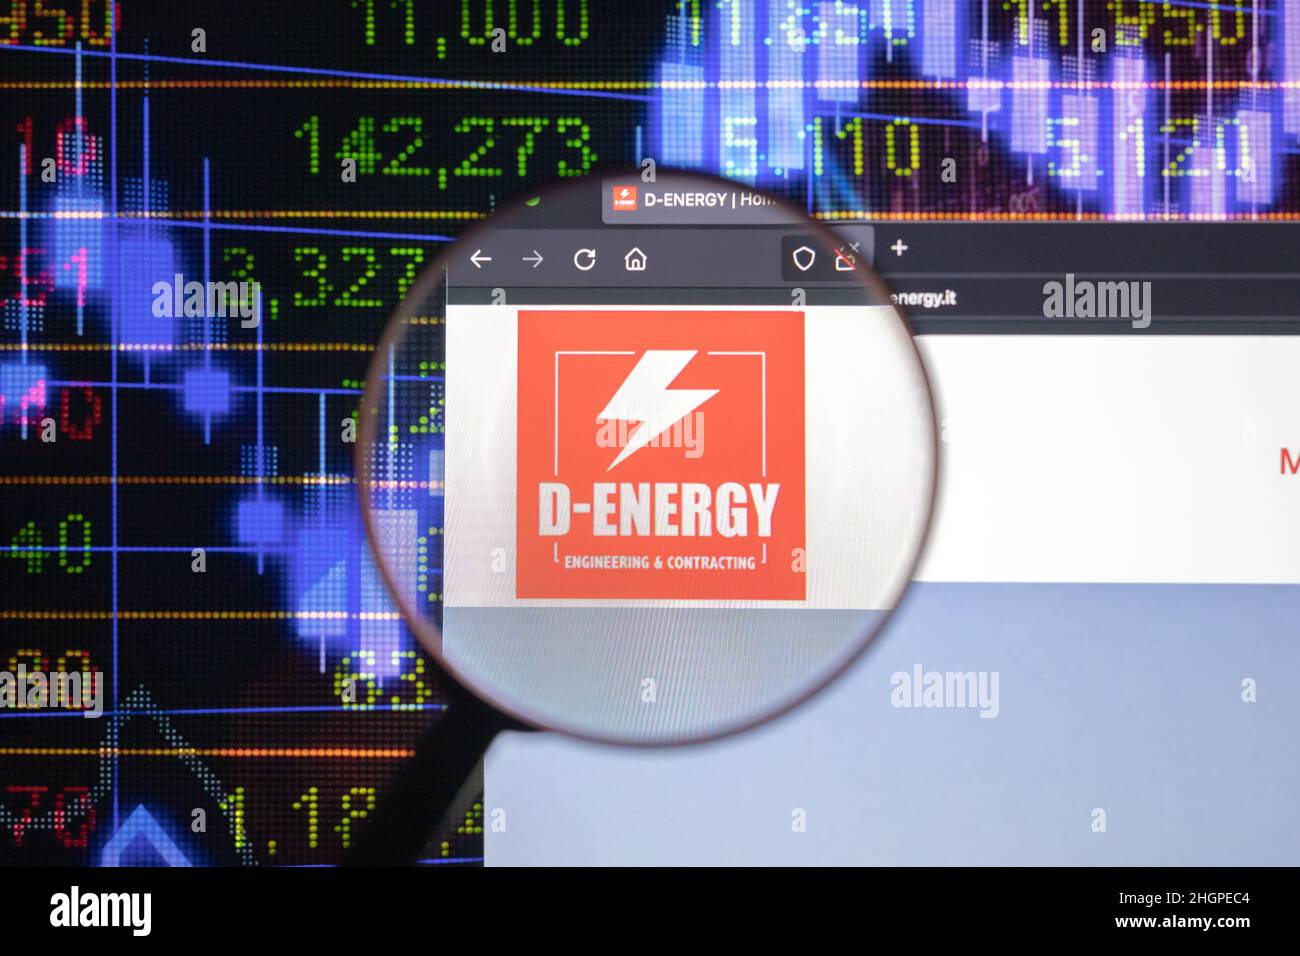 D-Energy company logo on a website with blurry stock market developments in the background, seen on a computer screen through a magnifying glass. Stock Photo